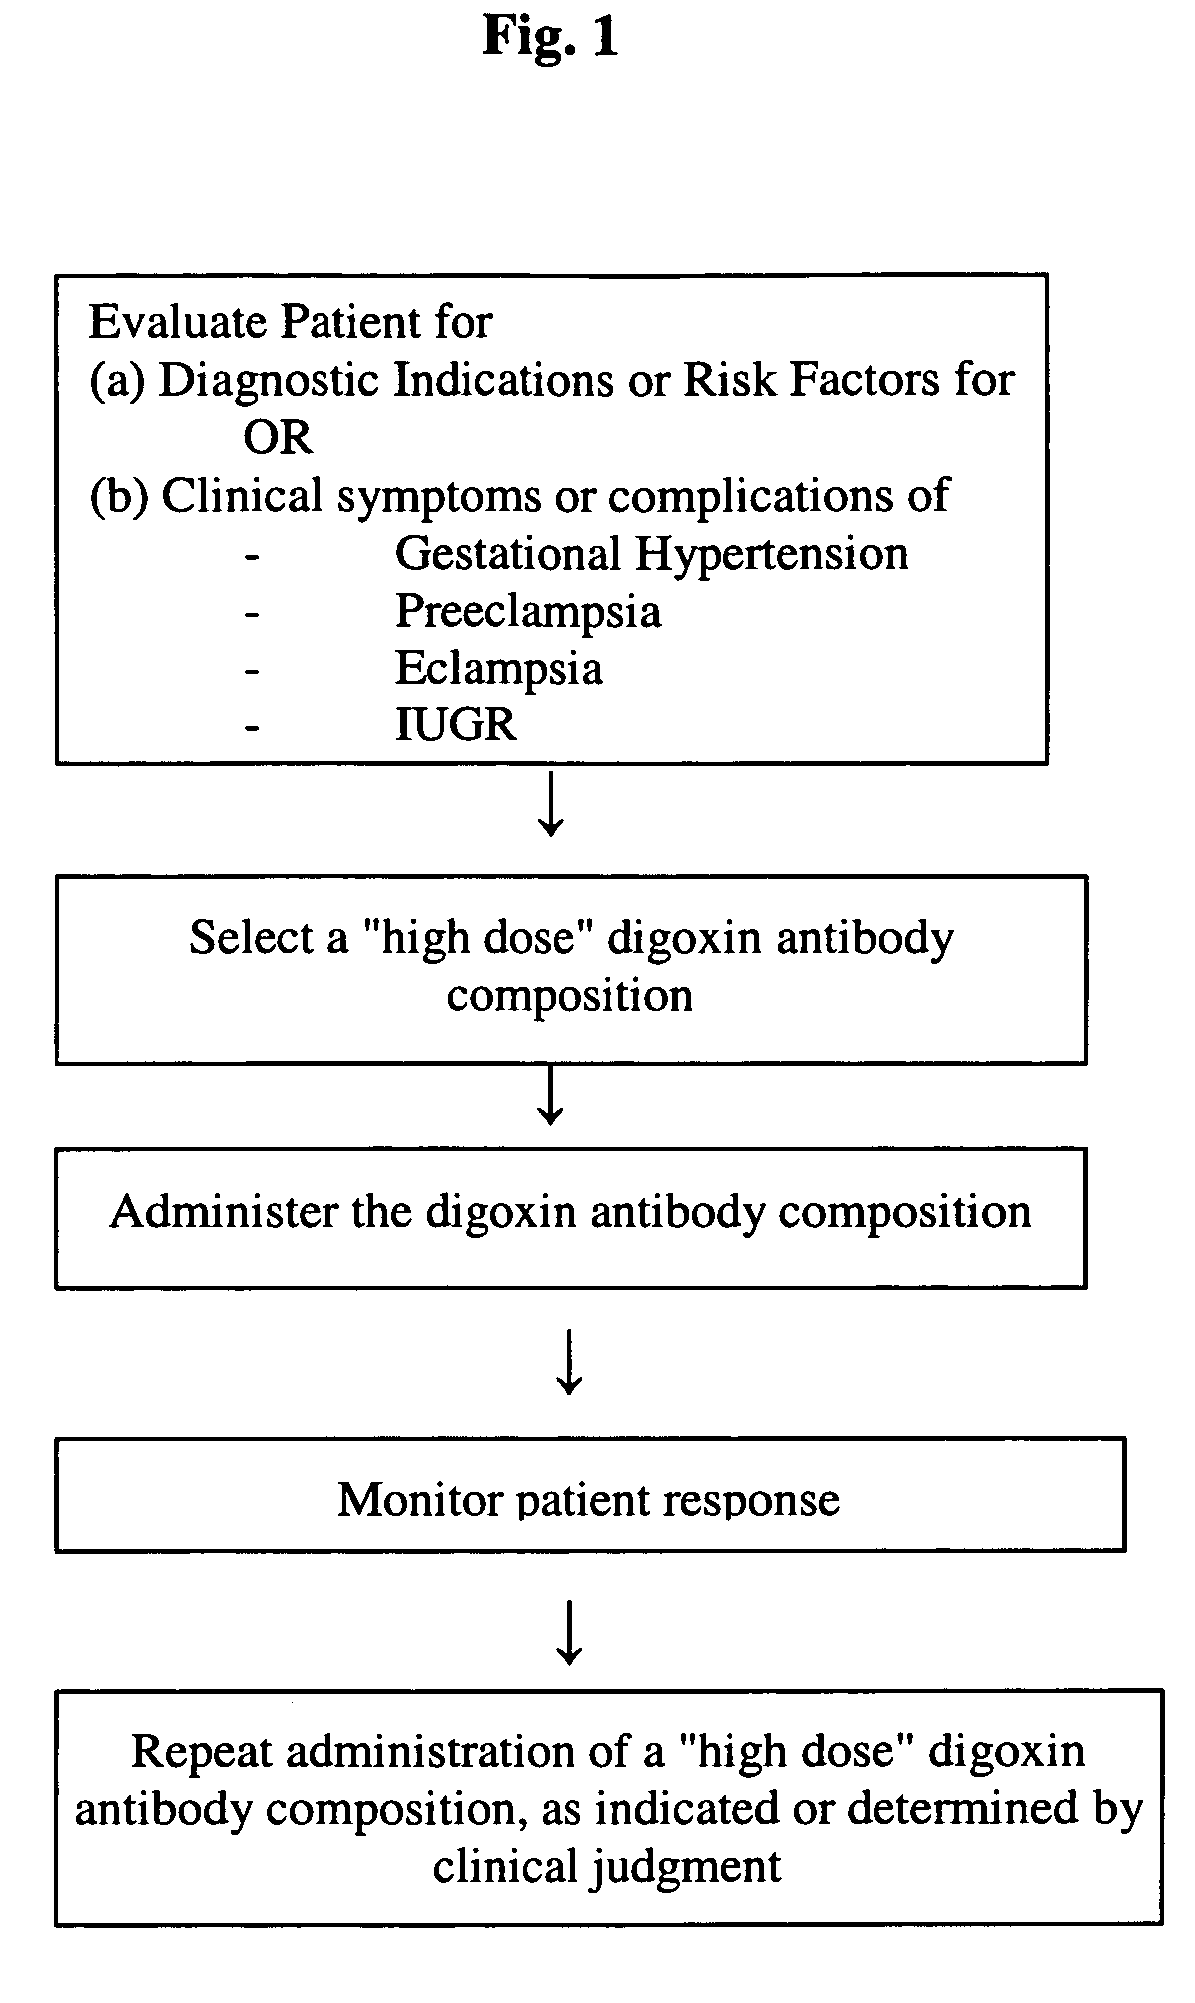 Antibody composition and passive immunization against pregnancy-induced hypertension